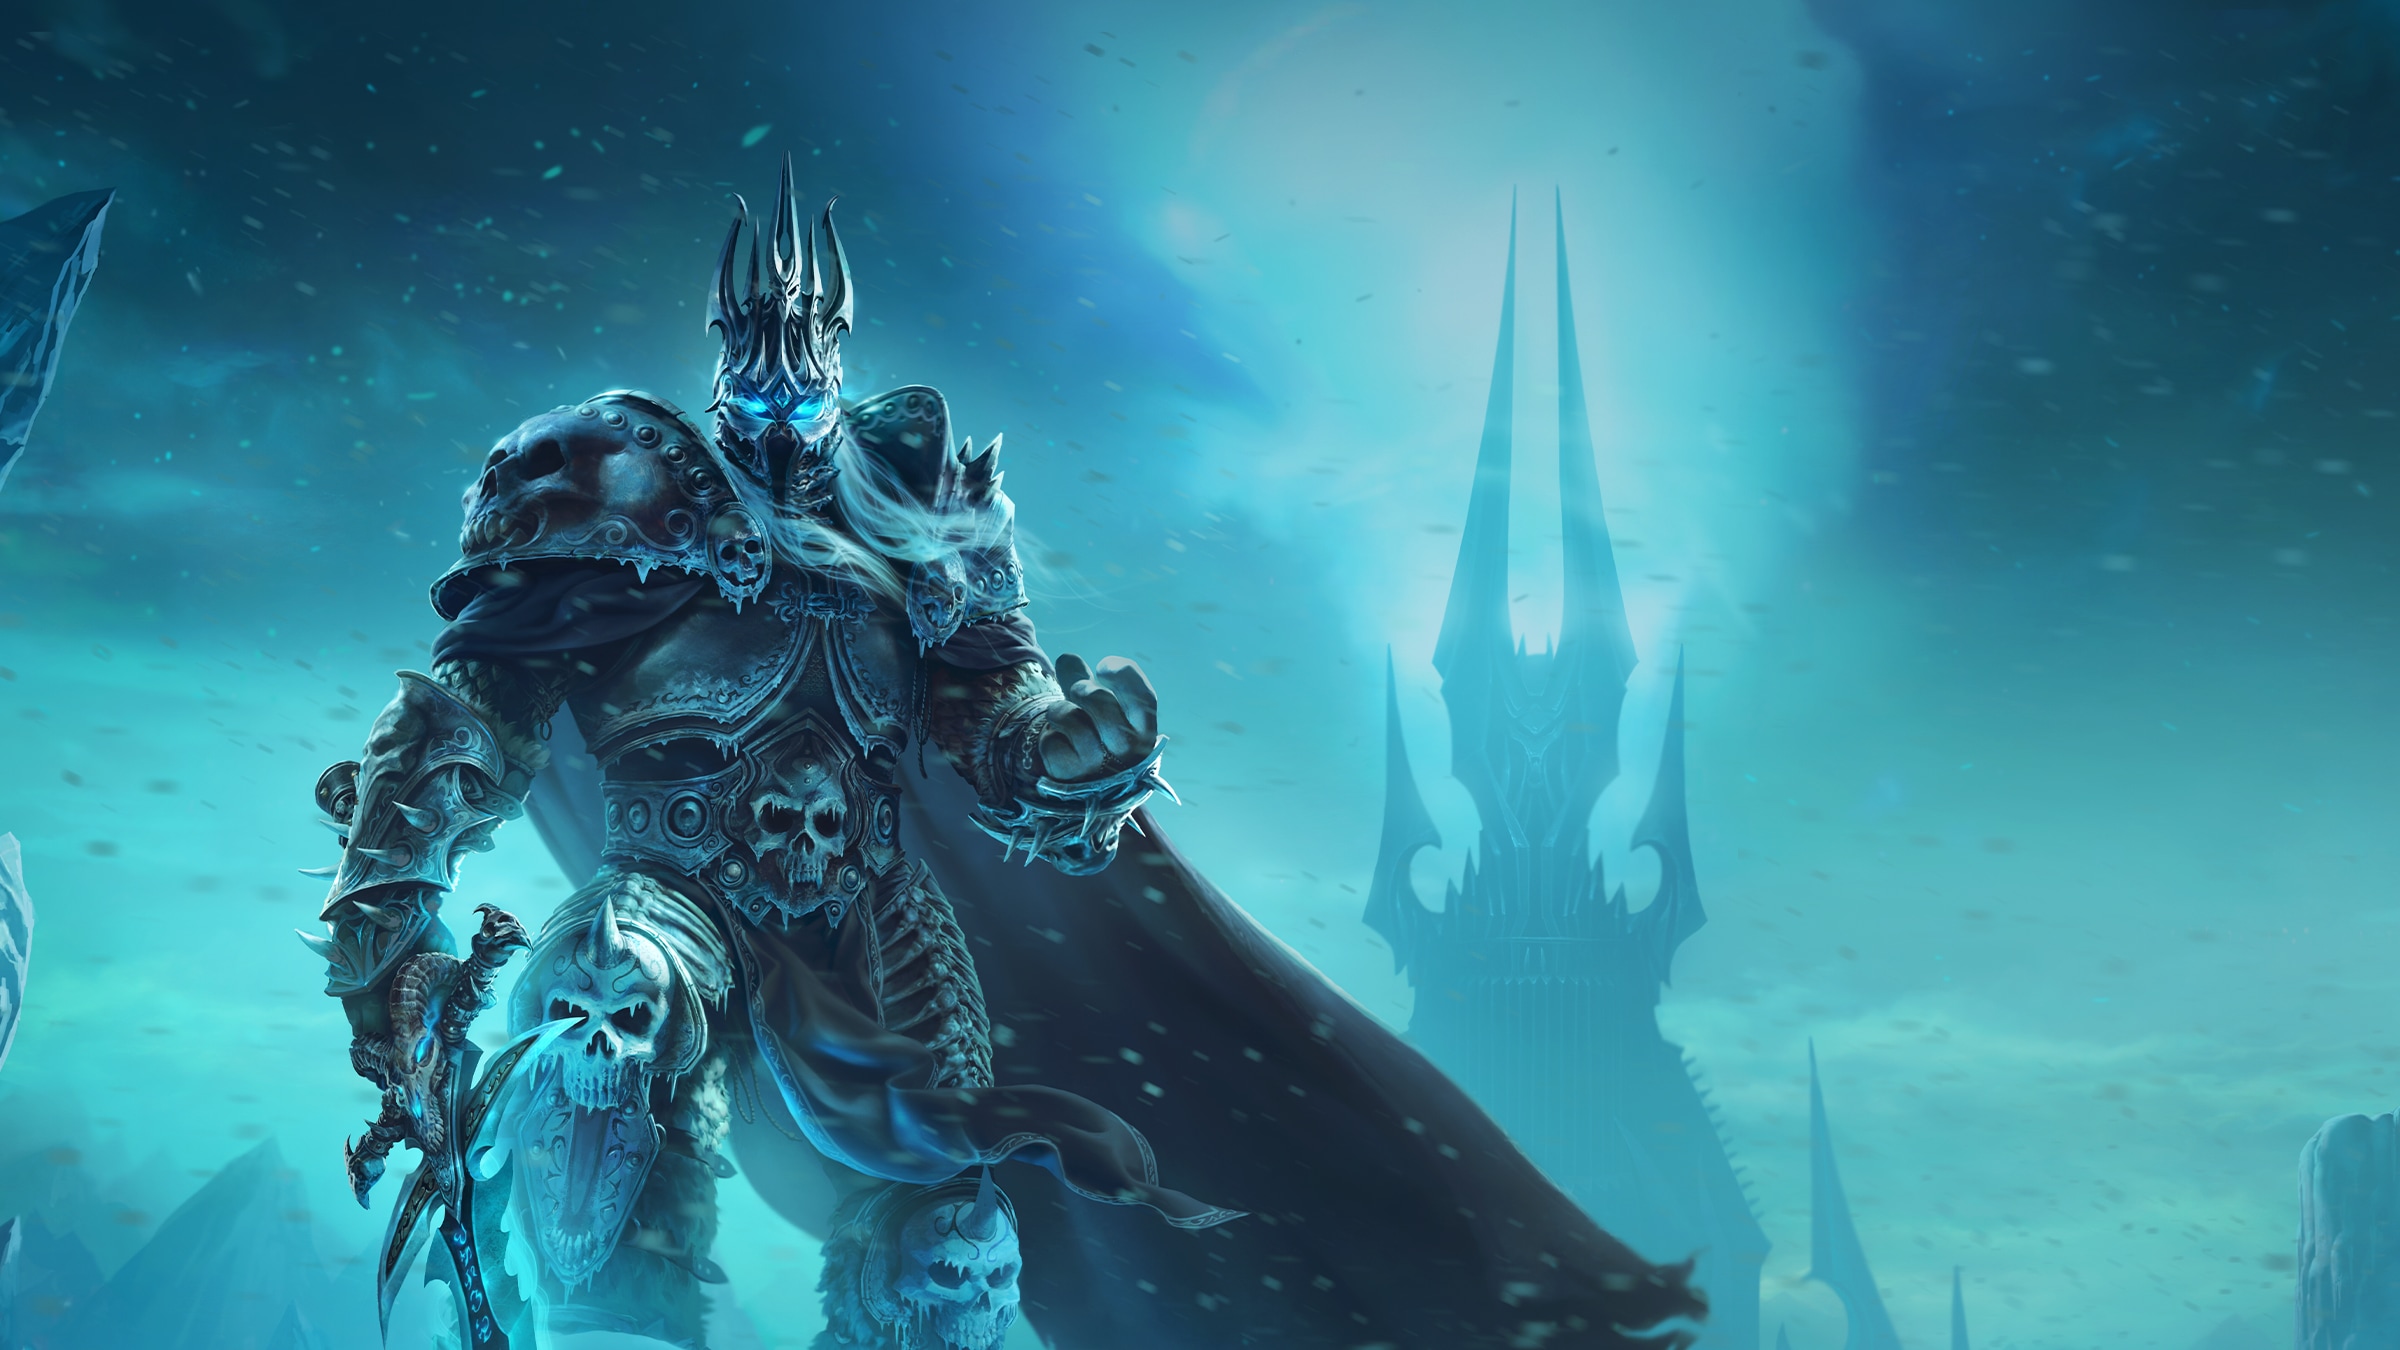 Return to the Icy Realm of Northrend in World of Warcraft®: Wrath of the Lich King Classic™